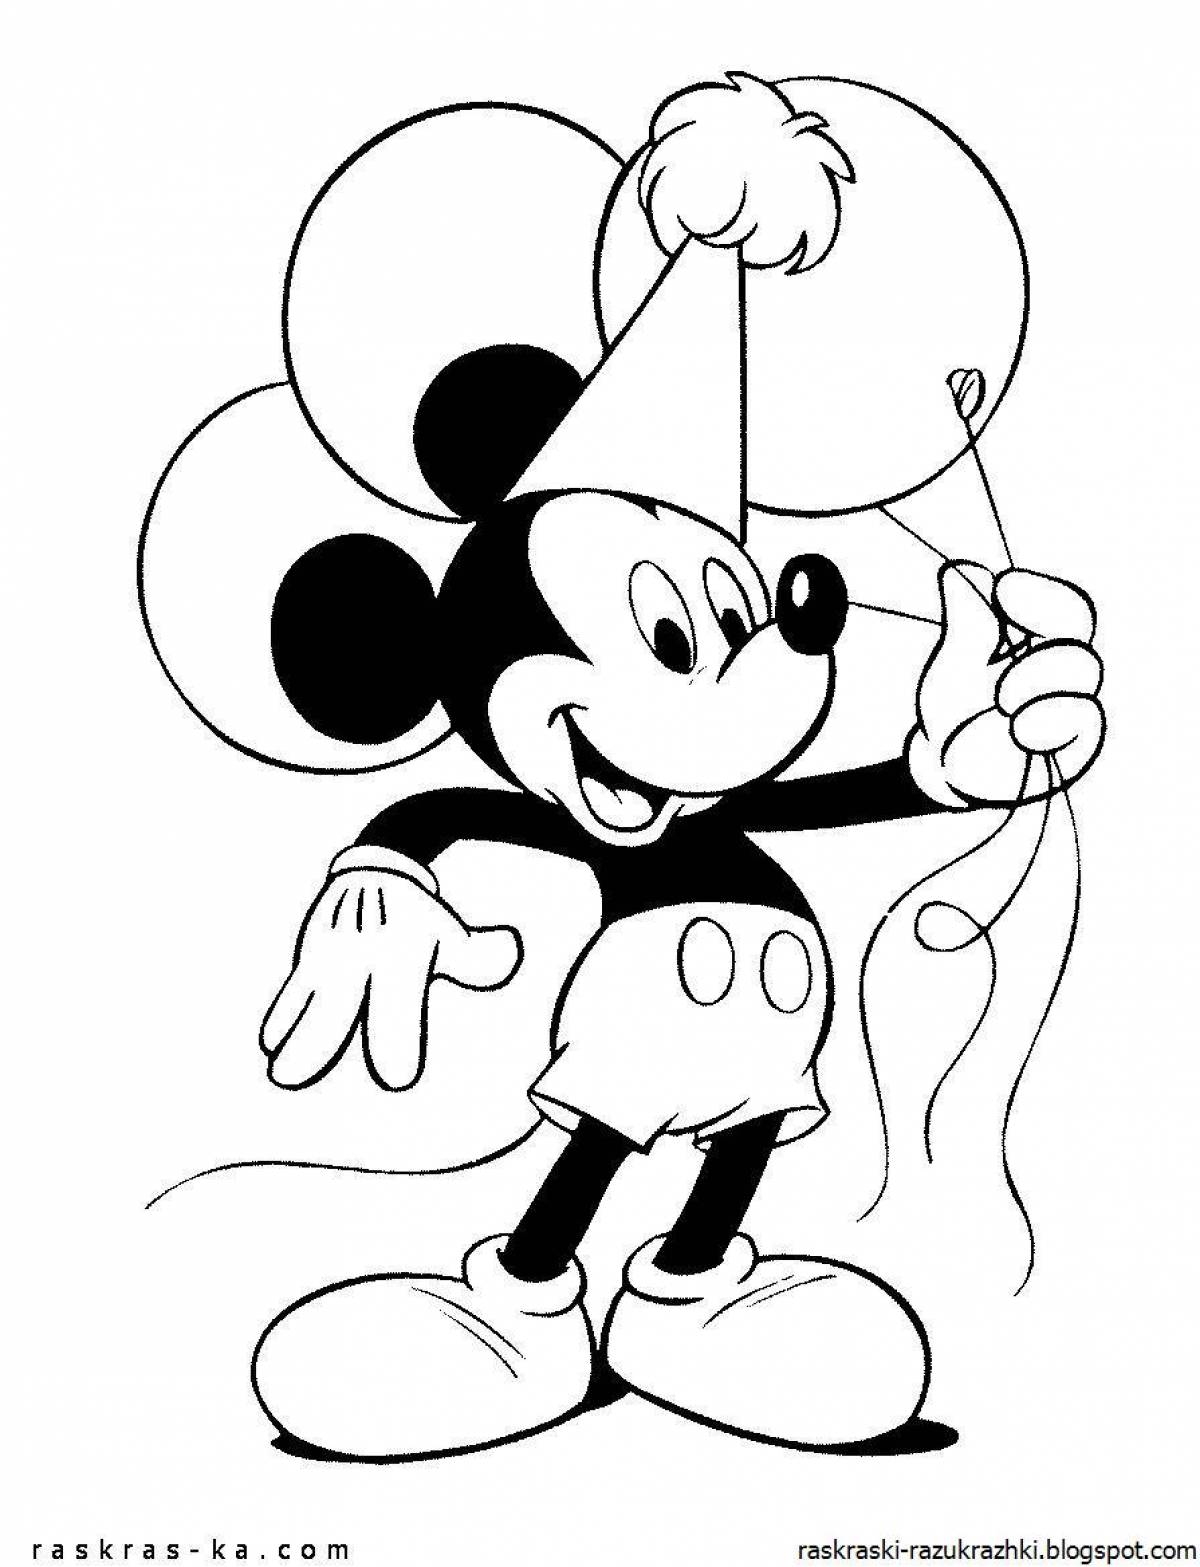 Coloring page energetic mickey mouse